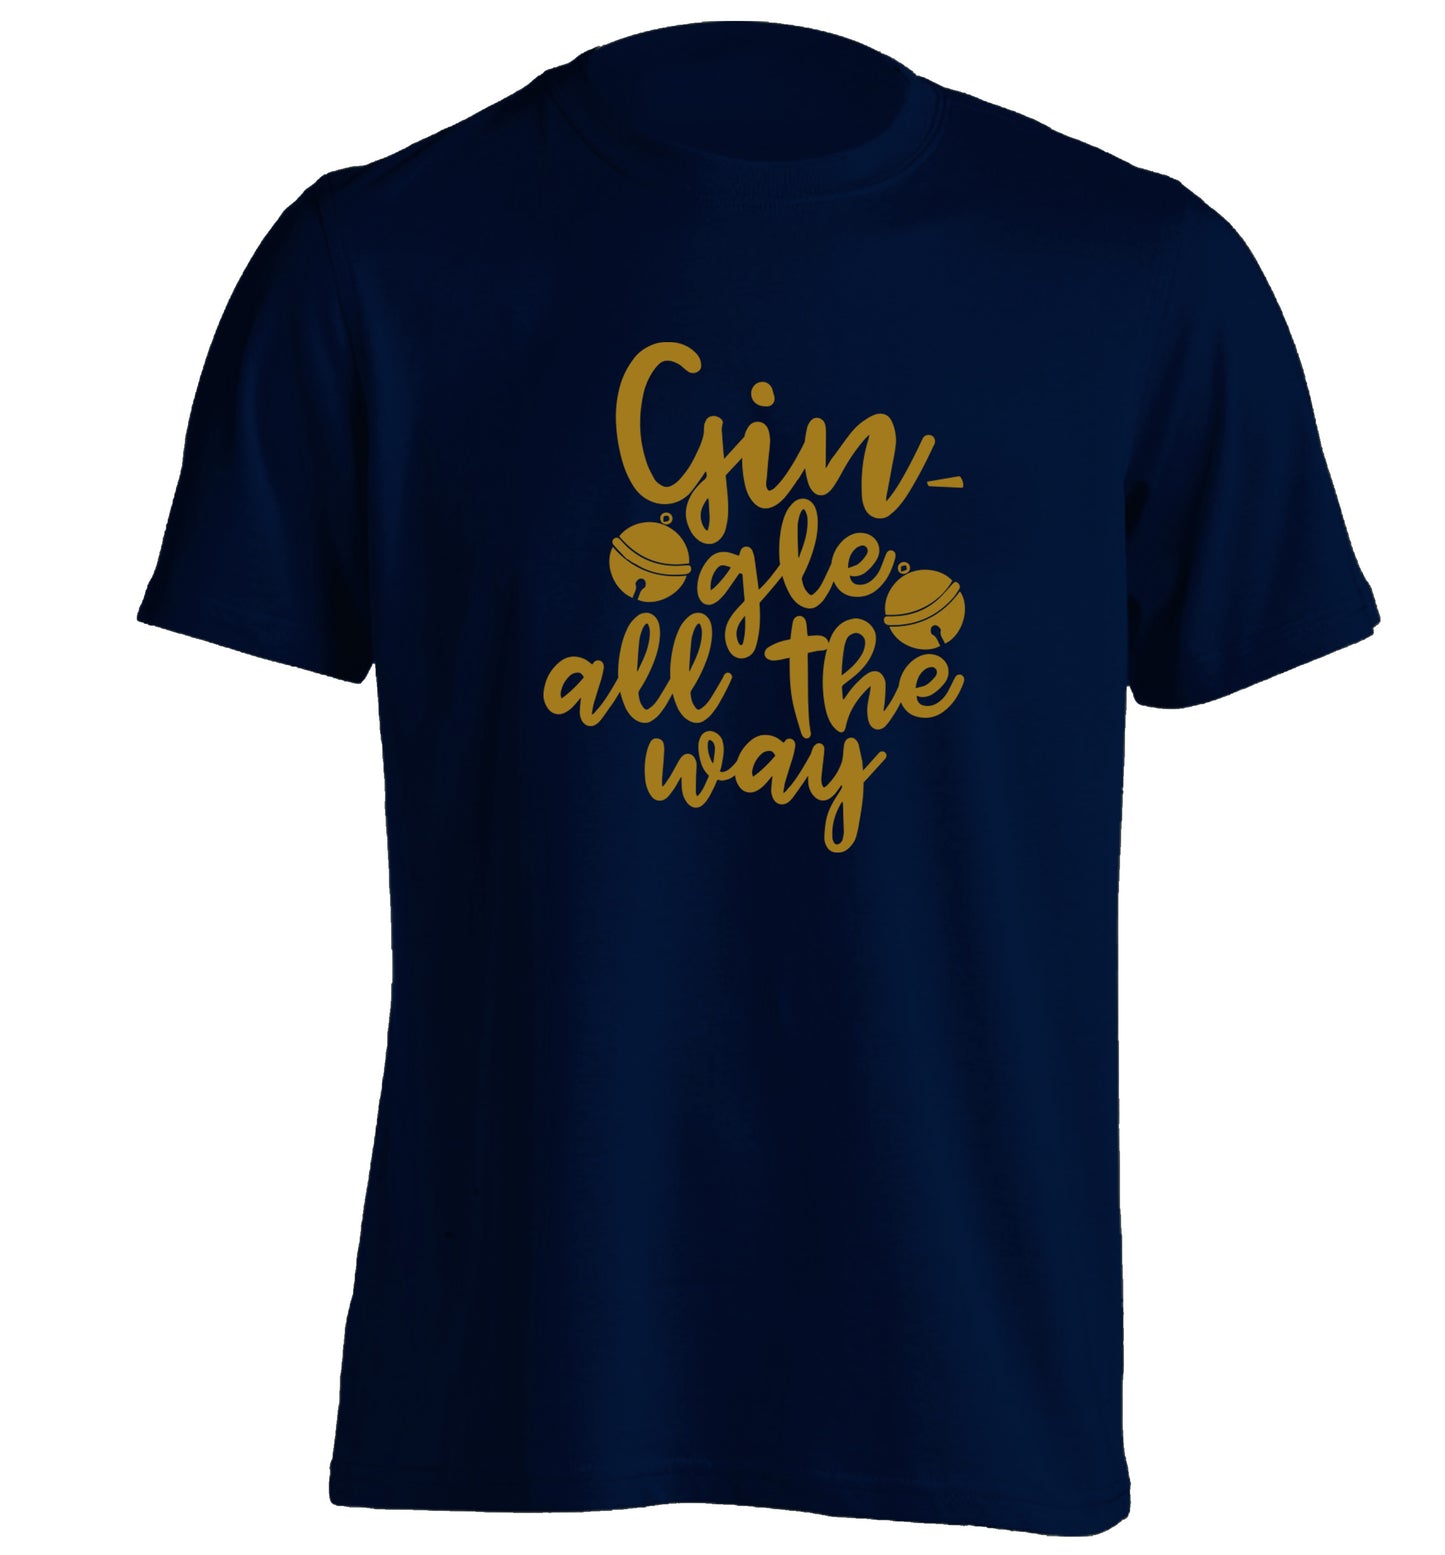 Gin-gle all the way adults unisex navy Tshirt 2XL